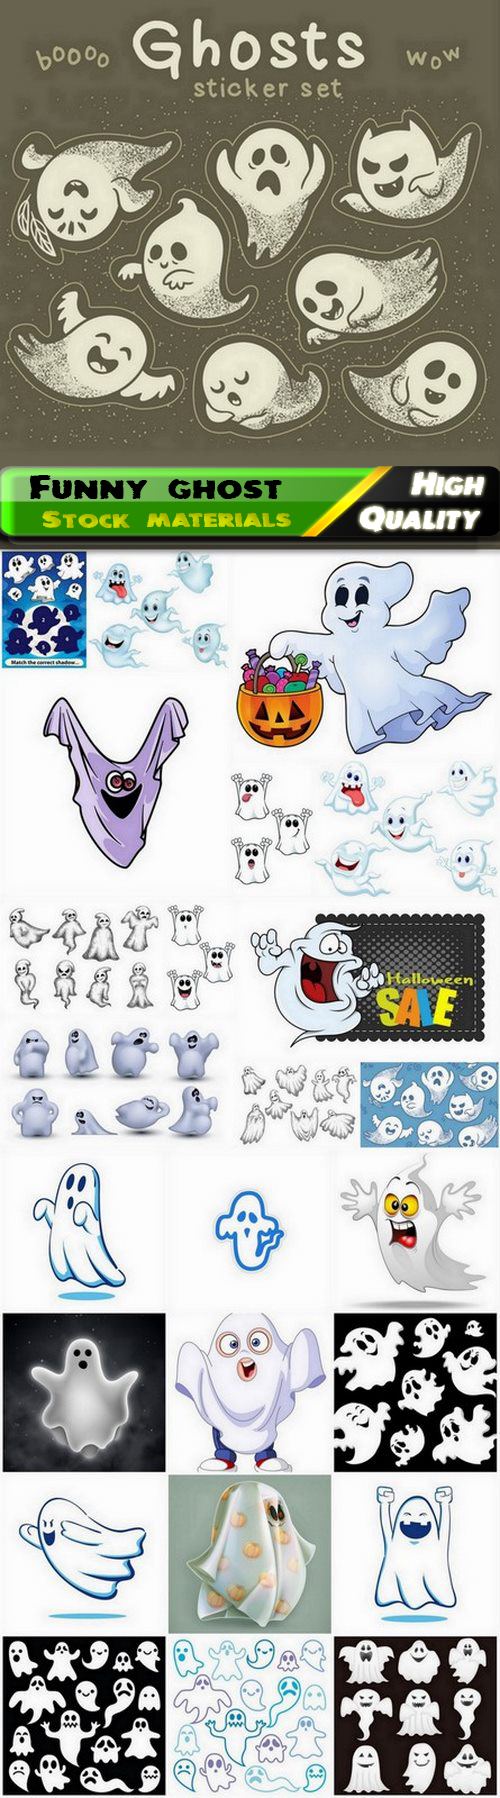 Funny ghost and scary soul for halloween holiday - 25 Eps